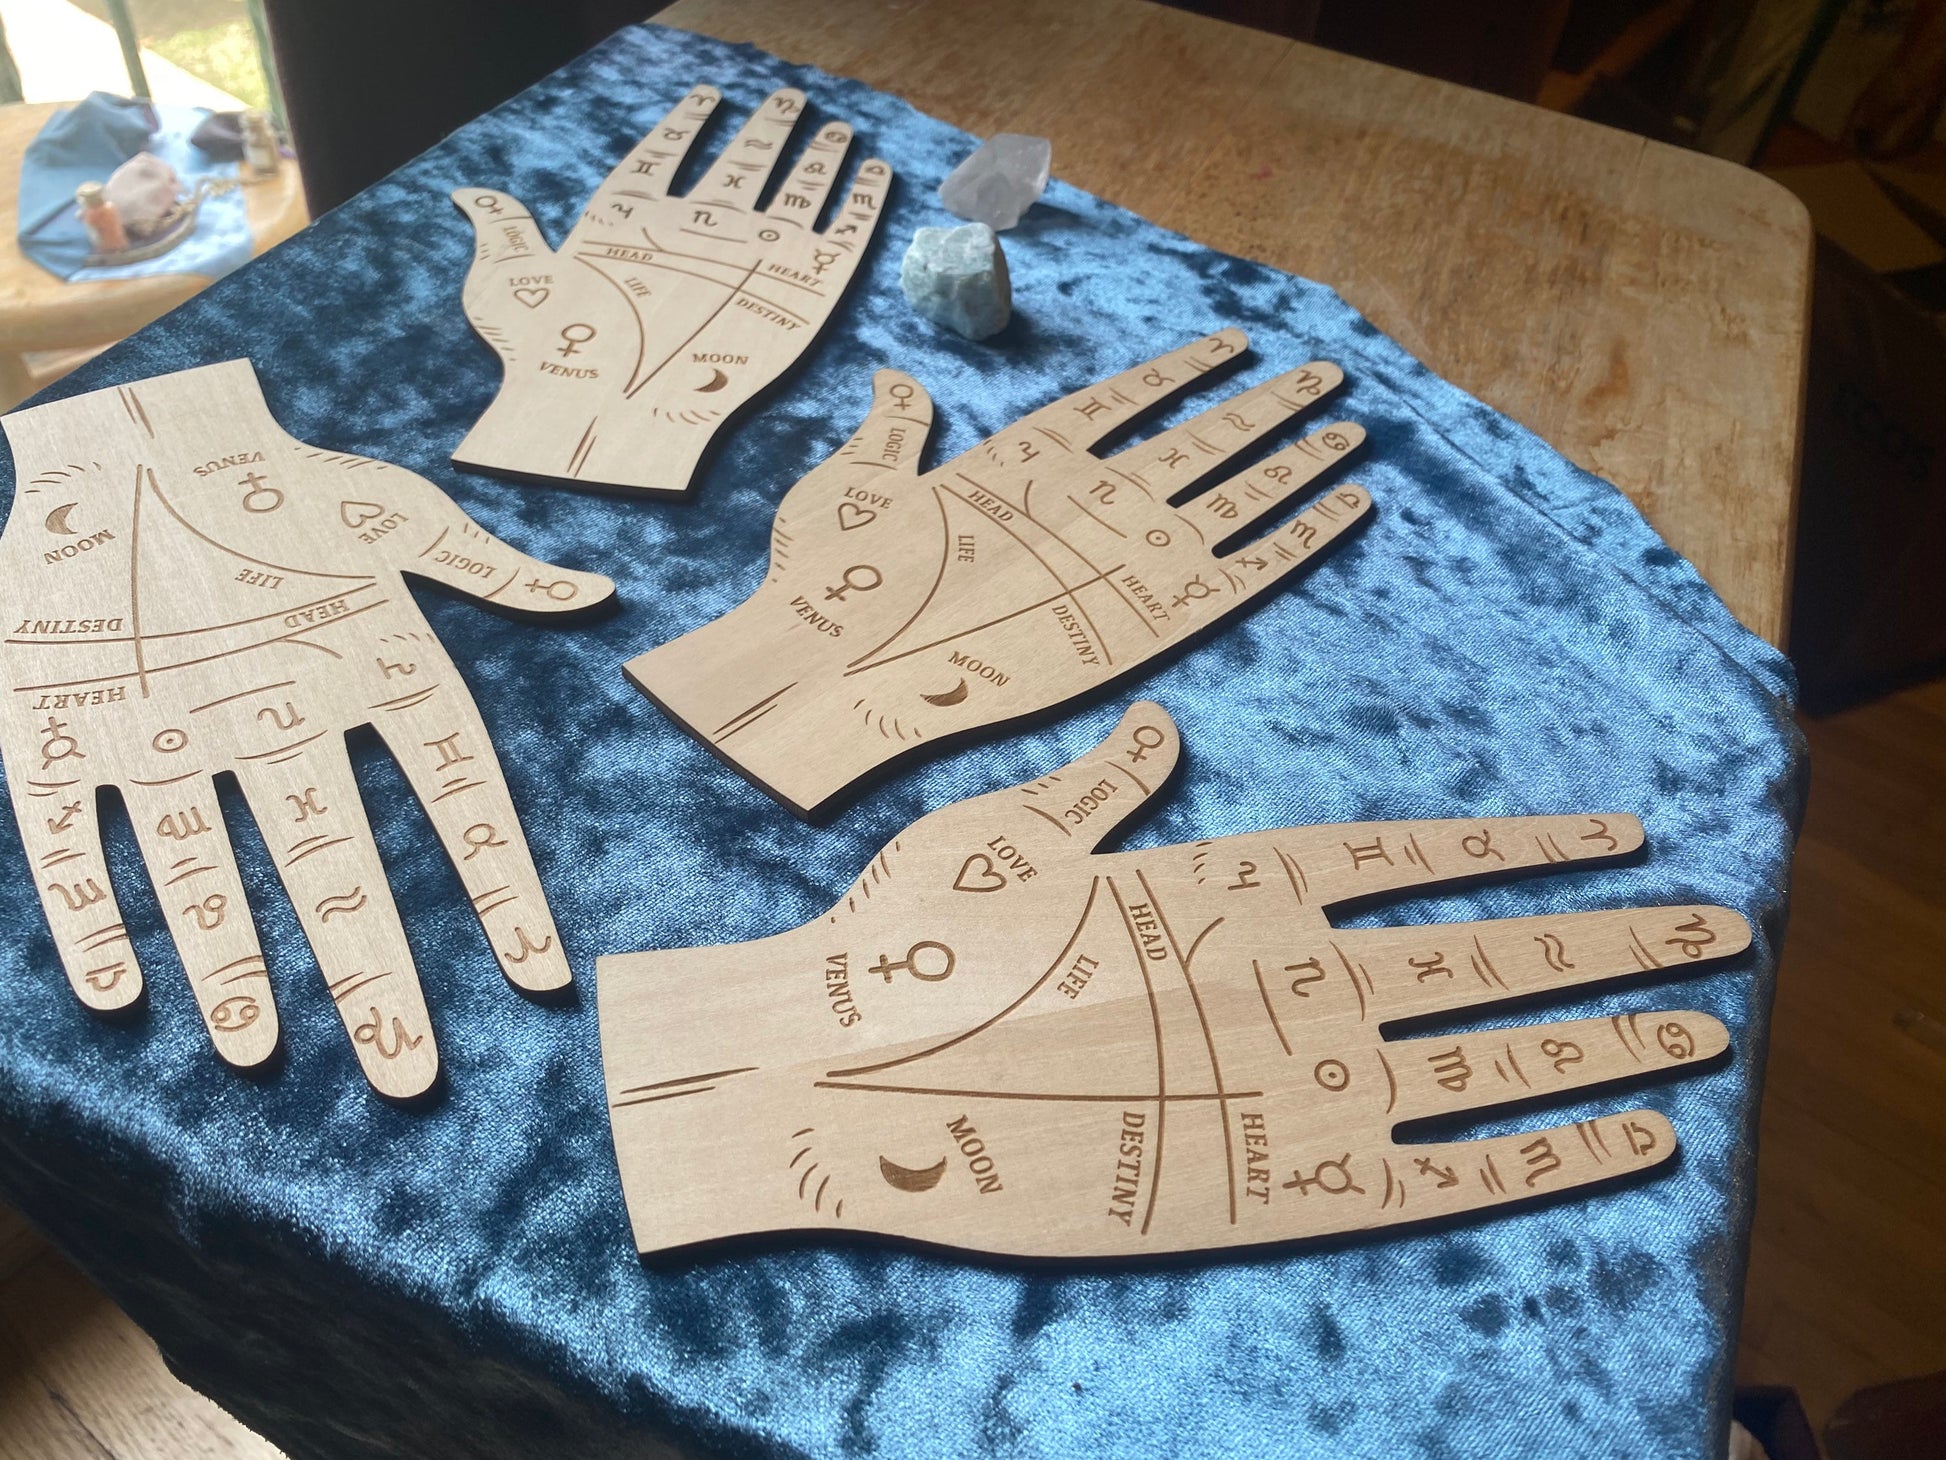 Palmistry hand wooden carved divination witchcraft kit wiccan supplies and tools